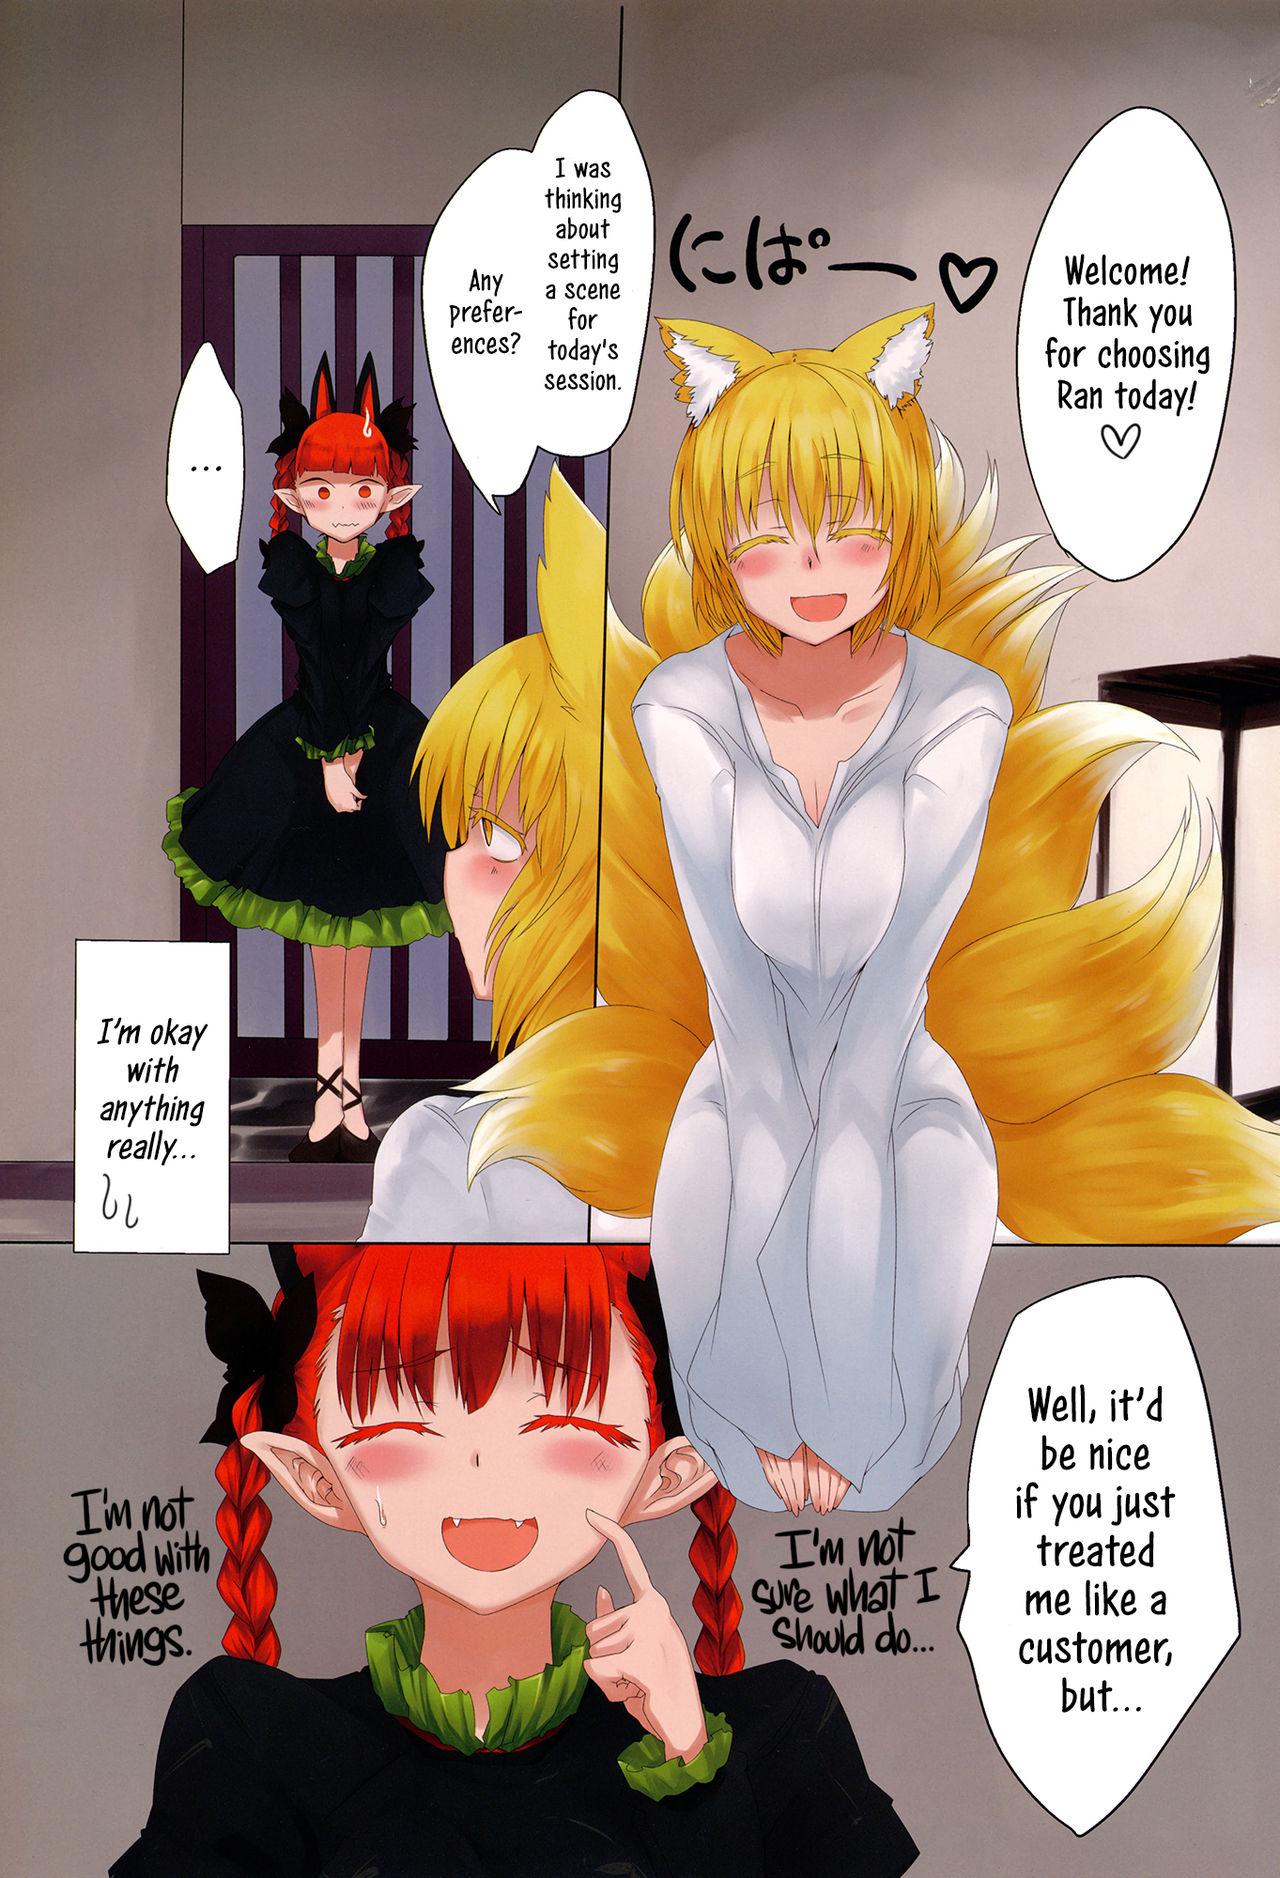 Cream Pie Rin Ran After 2 - Touhou project Handjob - Page 3